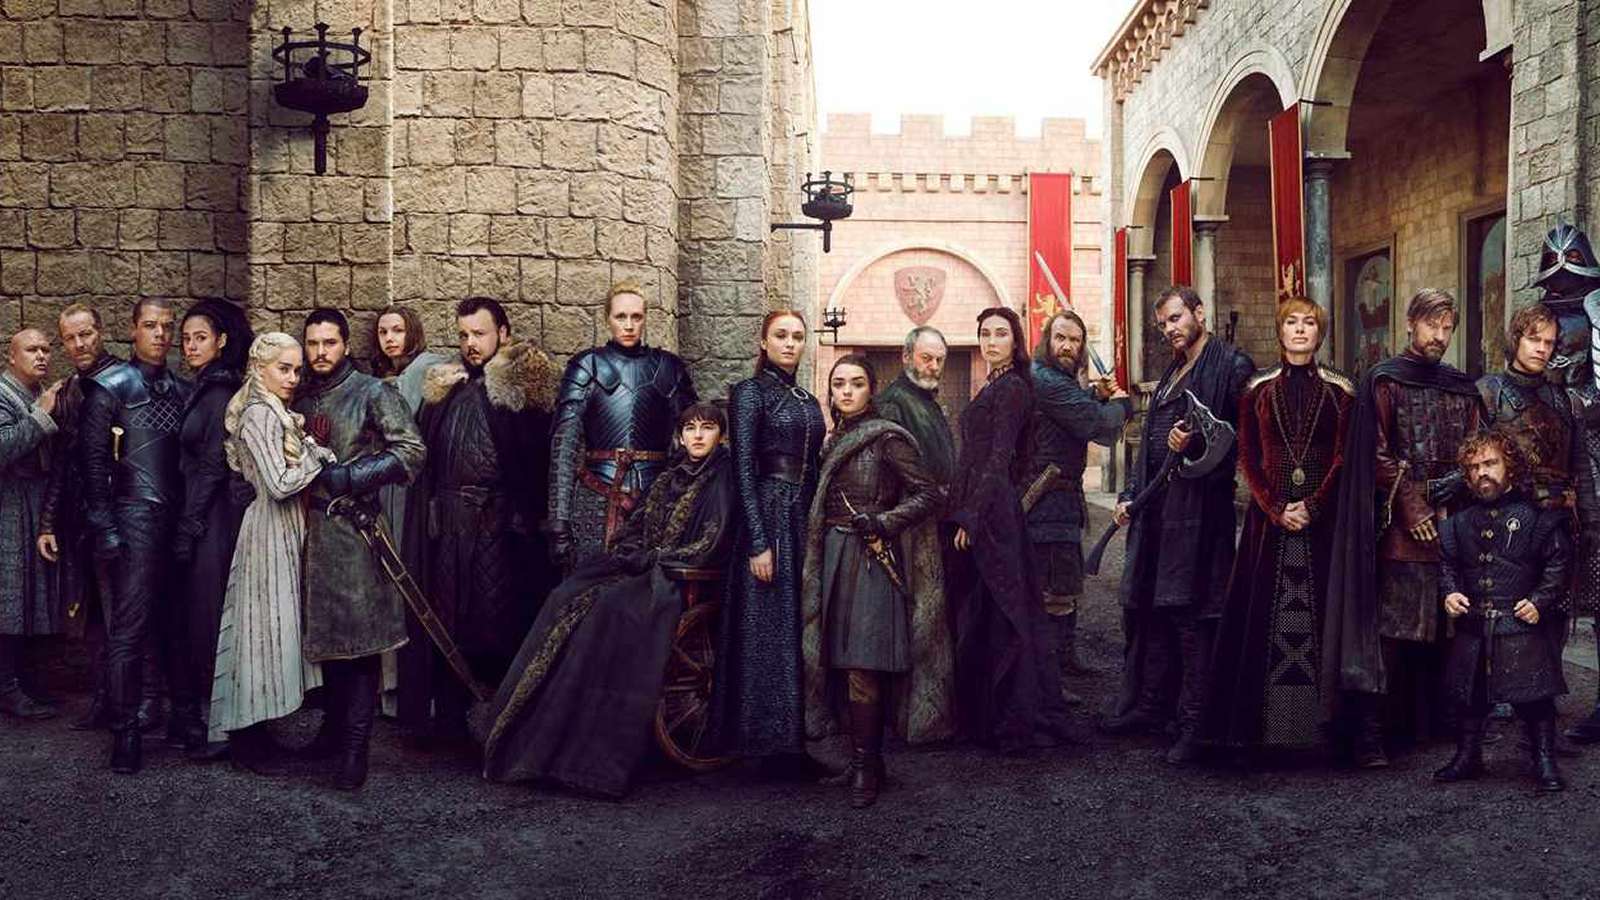 The core cast of Game of Thrones Season 8